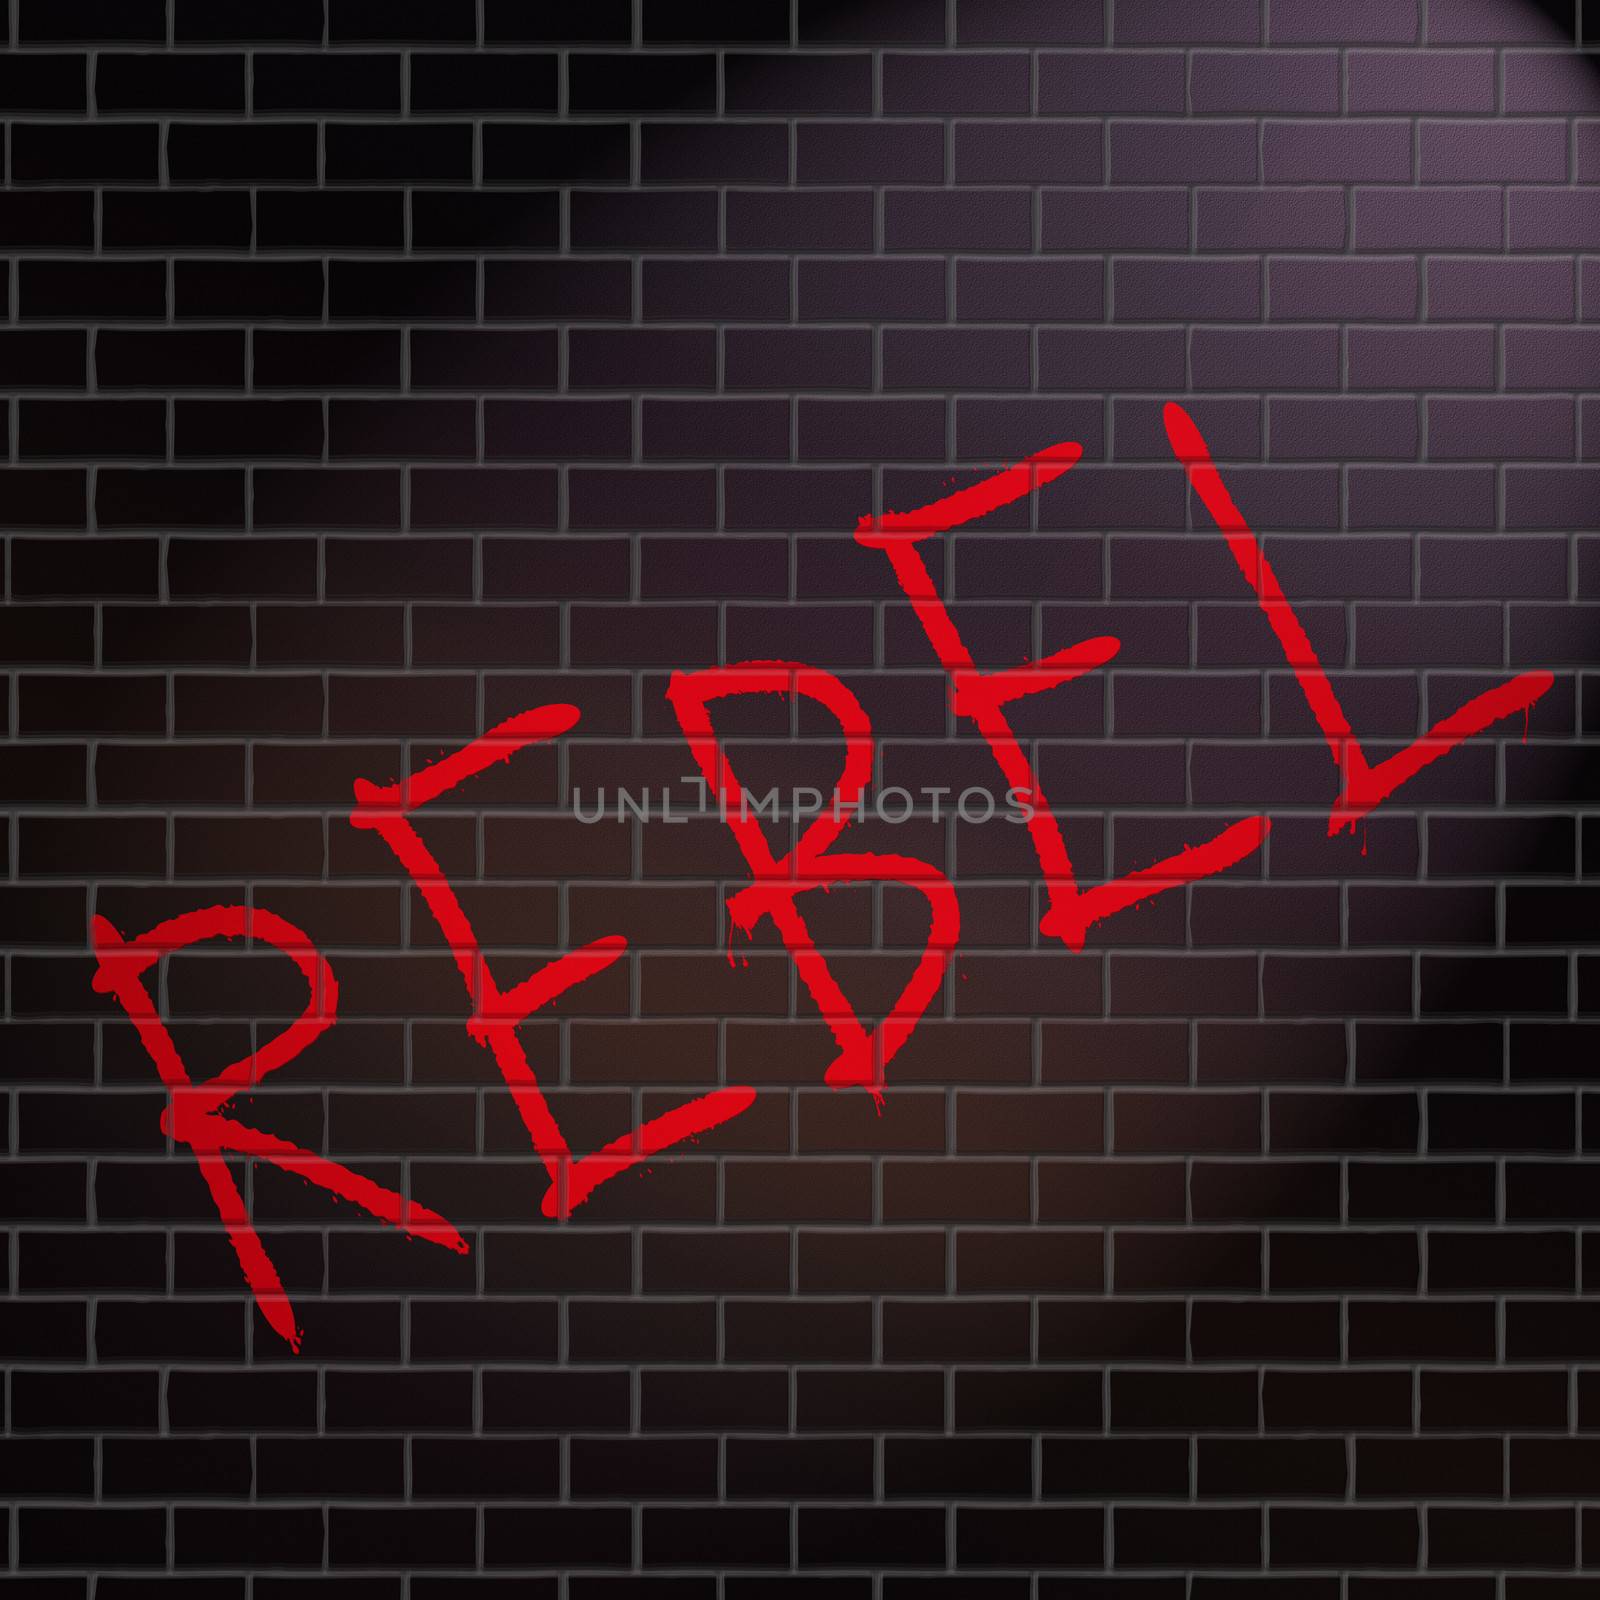 Illustration depicting grafitti on a wall with a rebel concept.